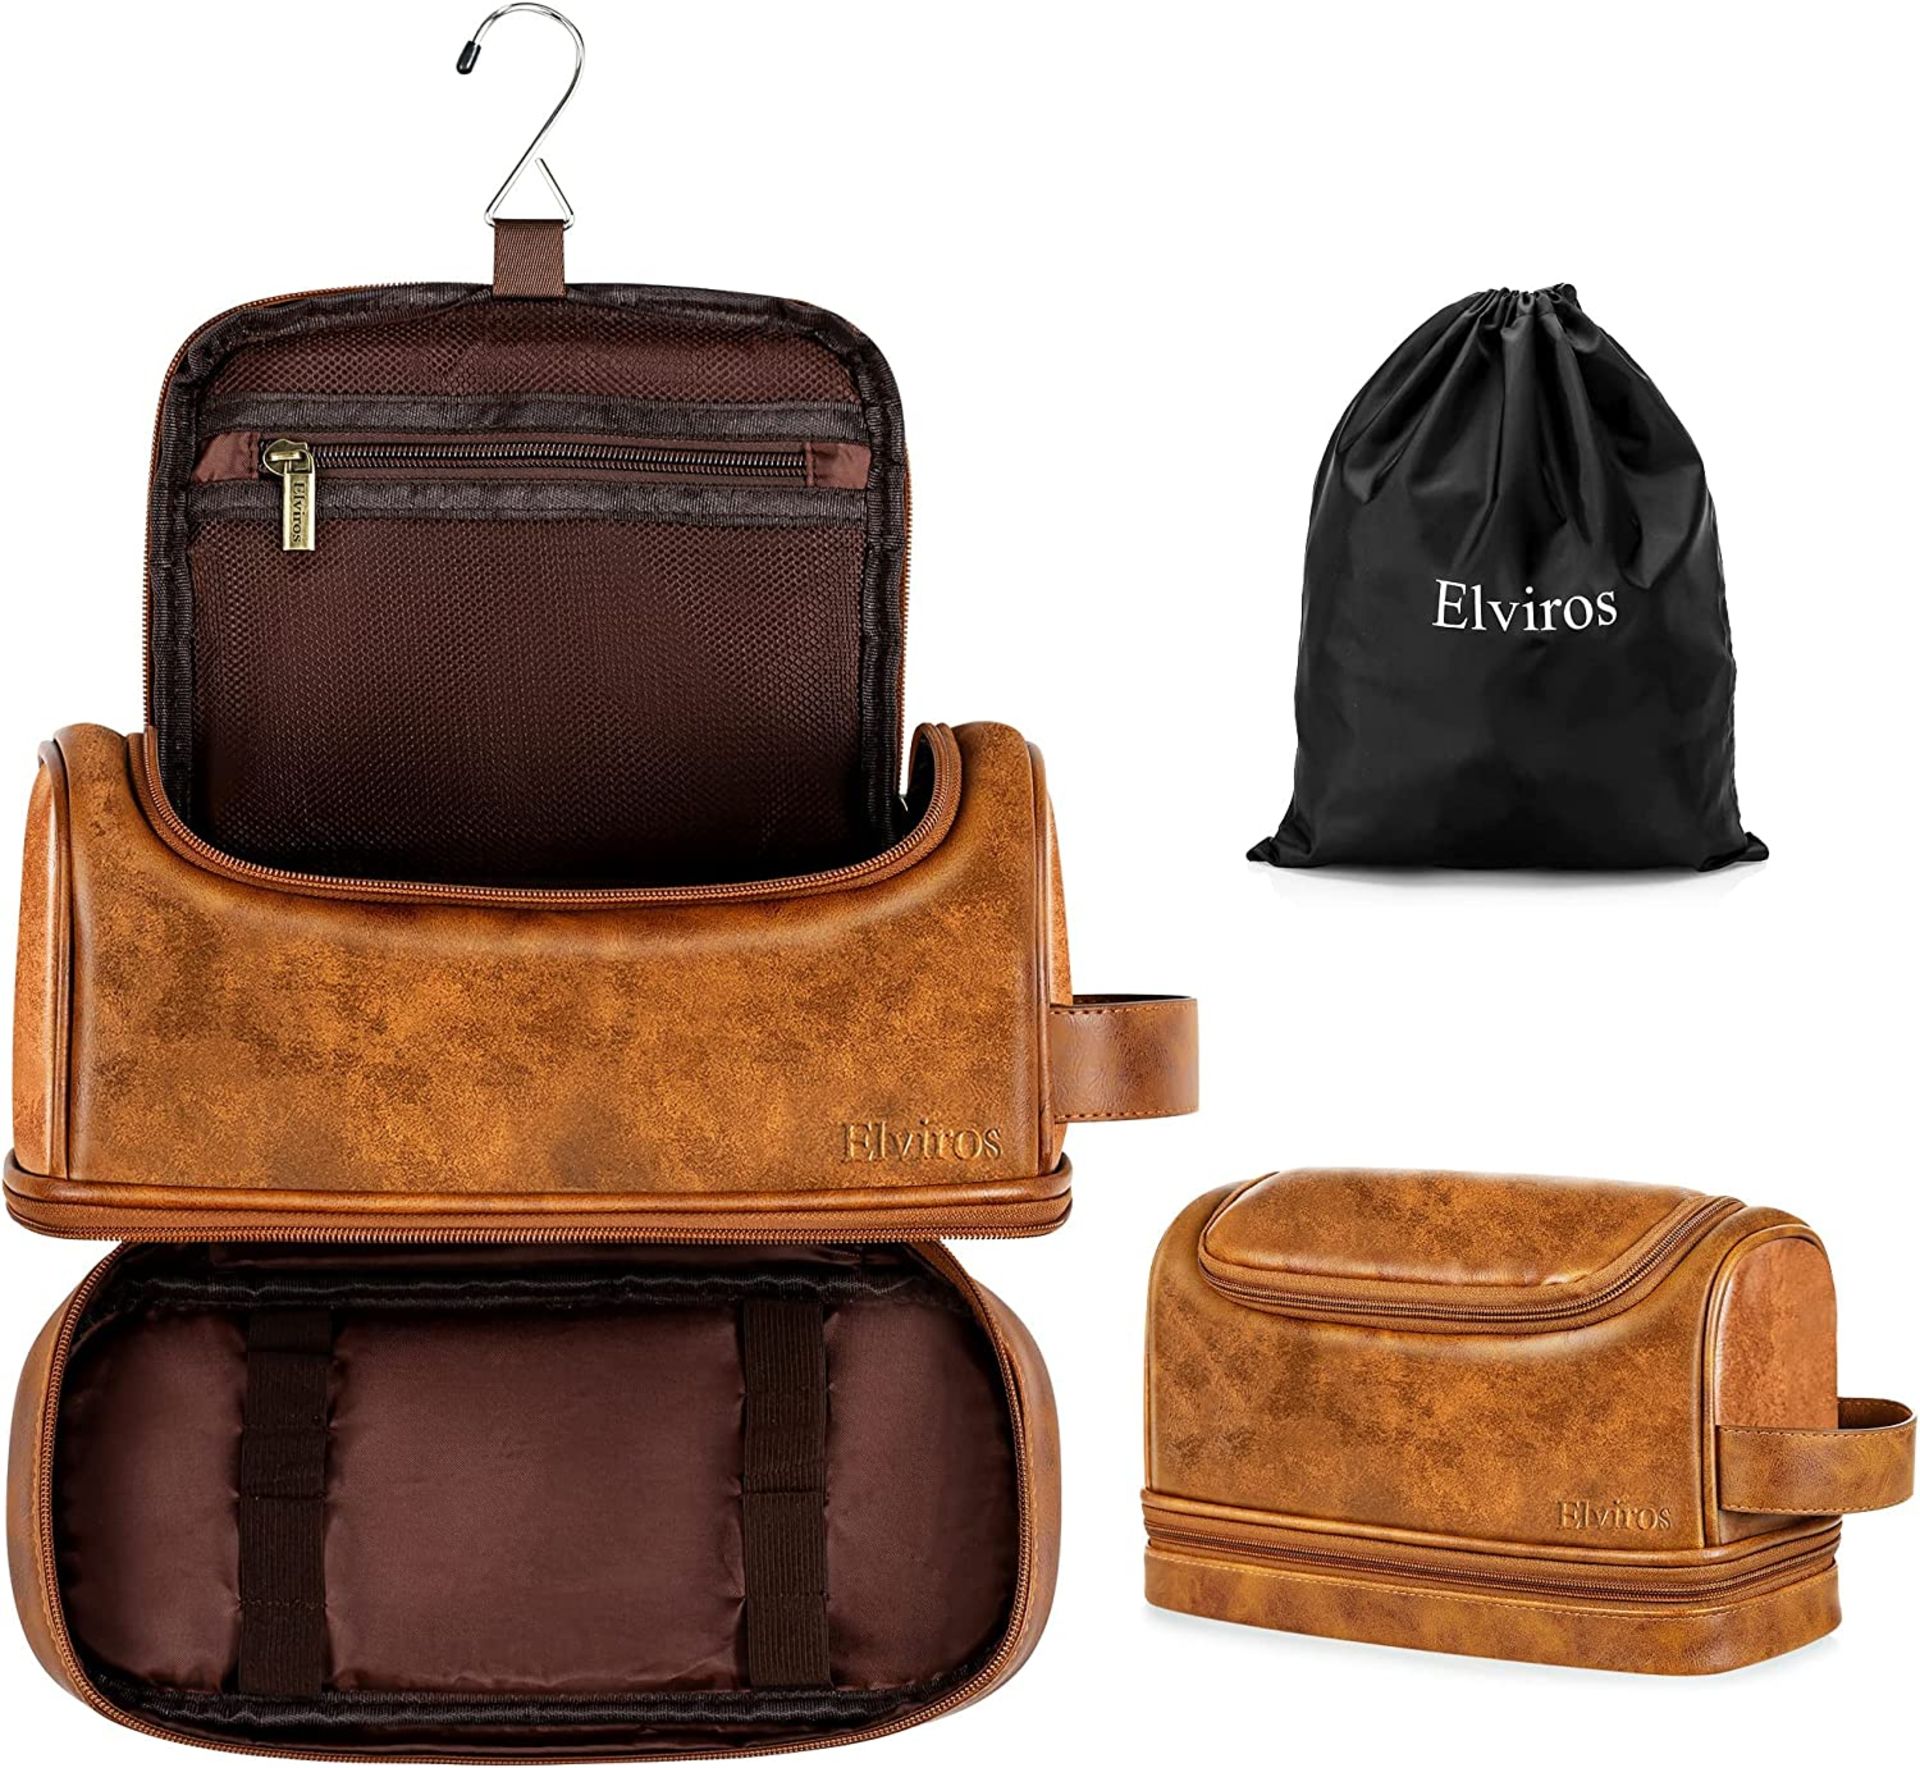 Elviros Water-Resistant Leather Toiletry Bag for Men Large Double-Layer Travel Wash Bag RRP £16.99